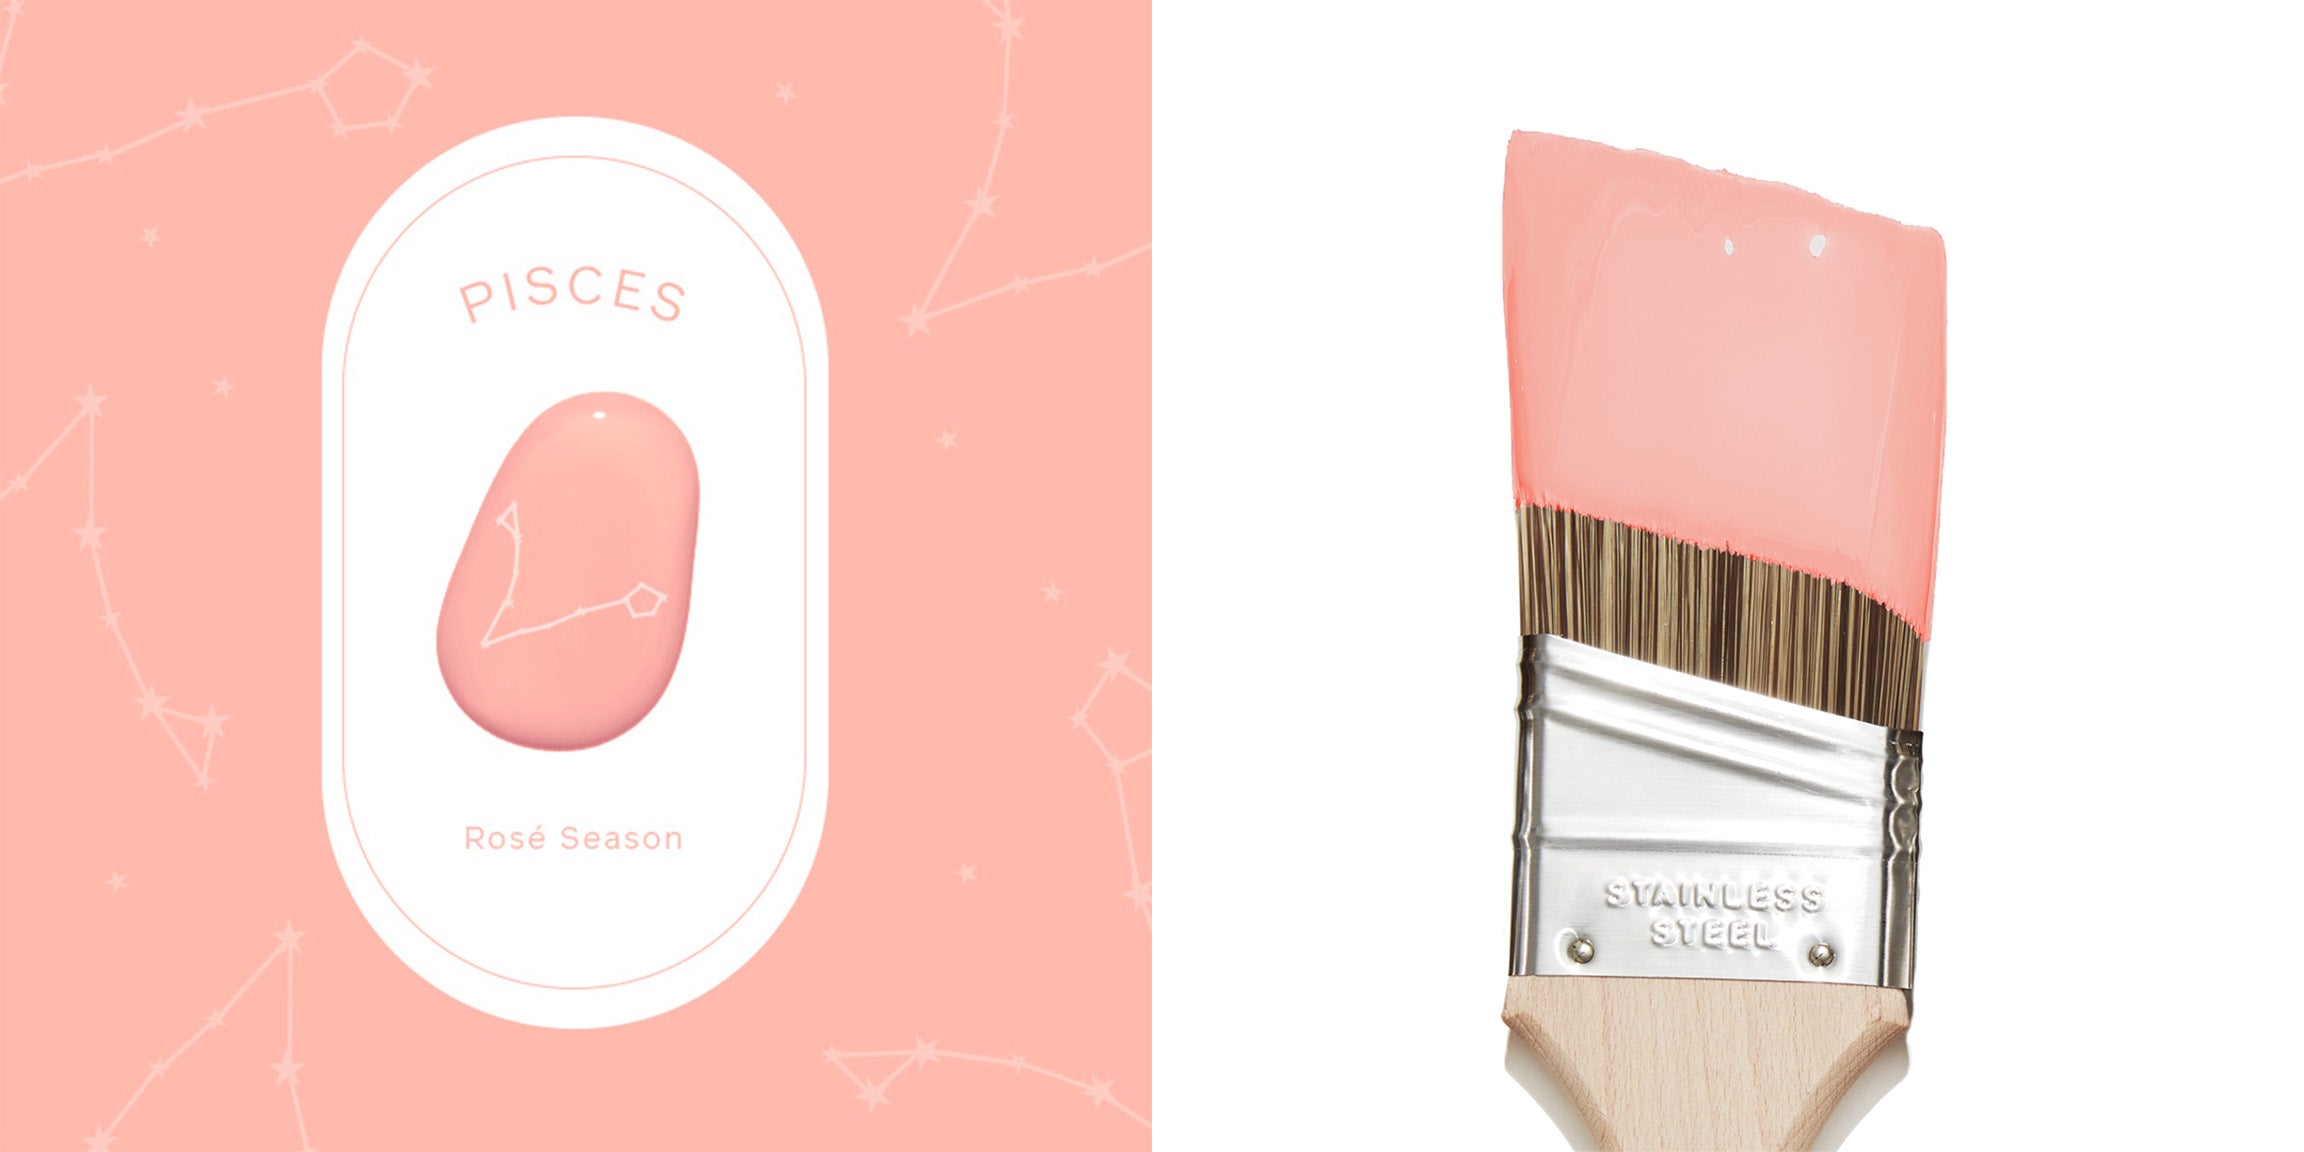 Get your 2023 horoscope and find the perfect paint colors for your zodiac. For Pisces, it’s Rosé Season — a fresh pink paint color from Clare.